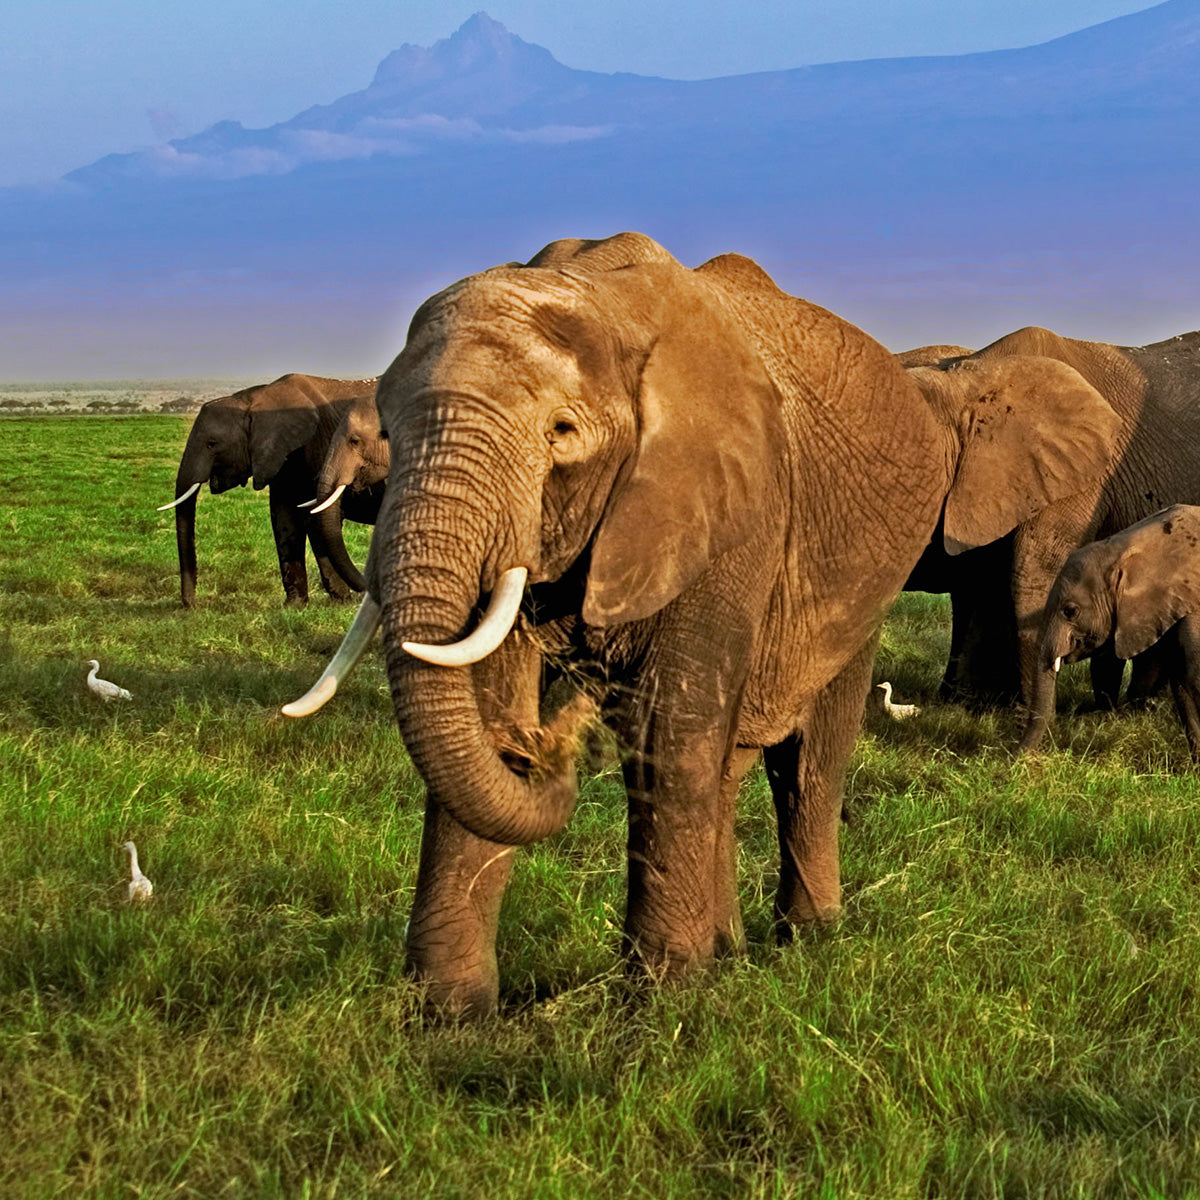 An African elephant walking and grazing in the African grasslands